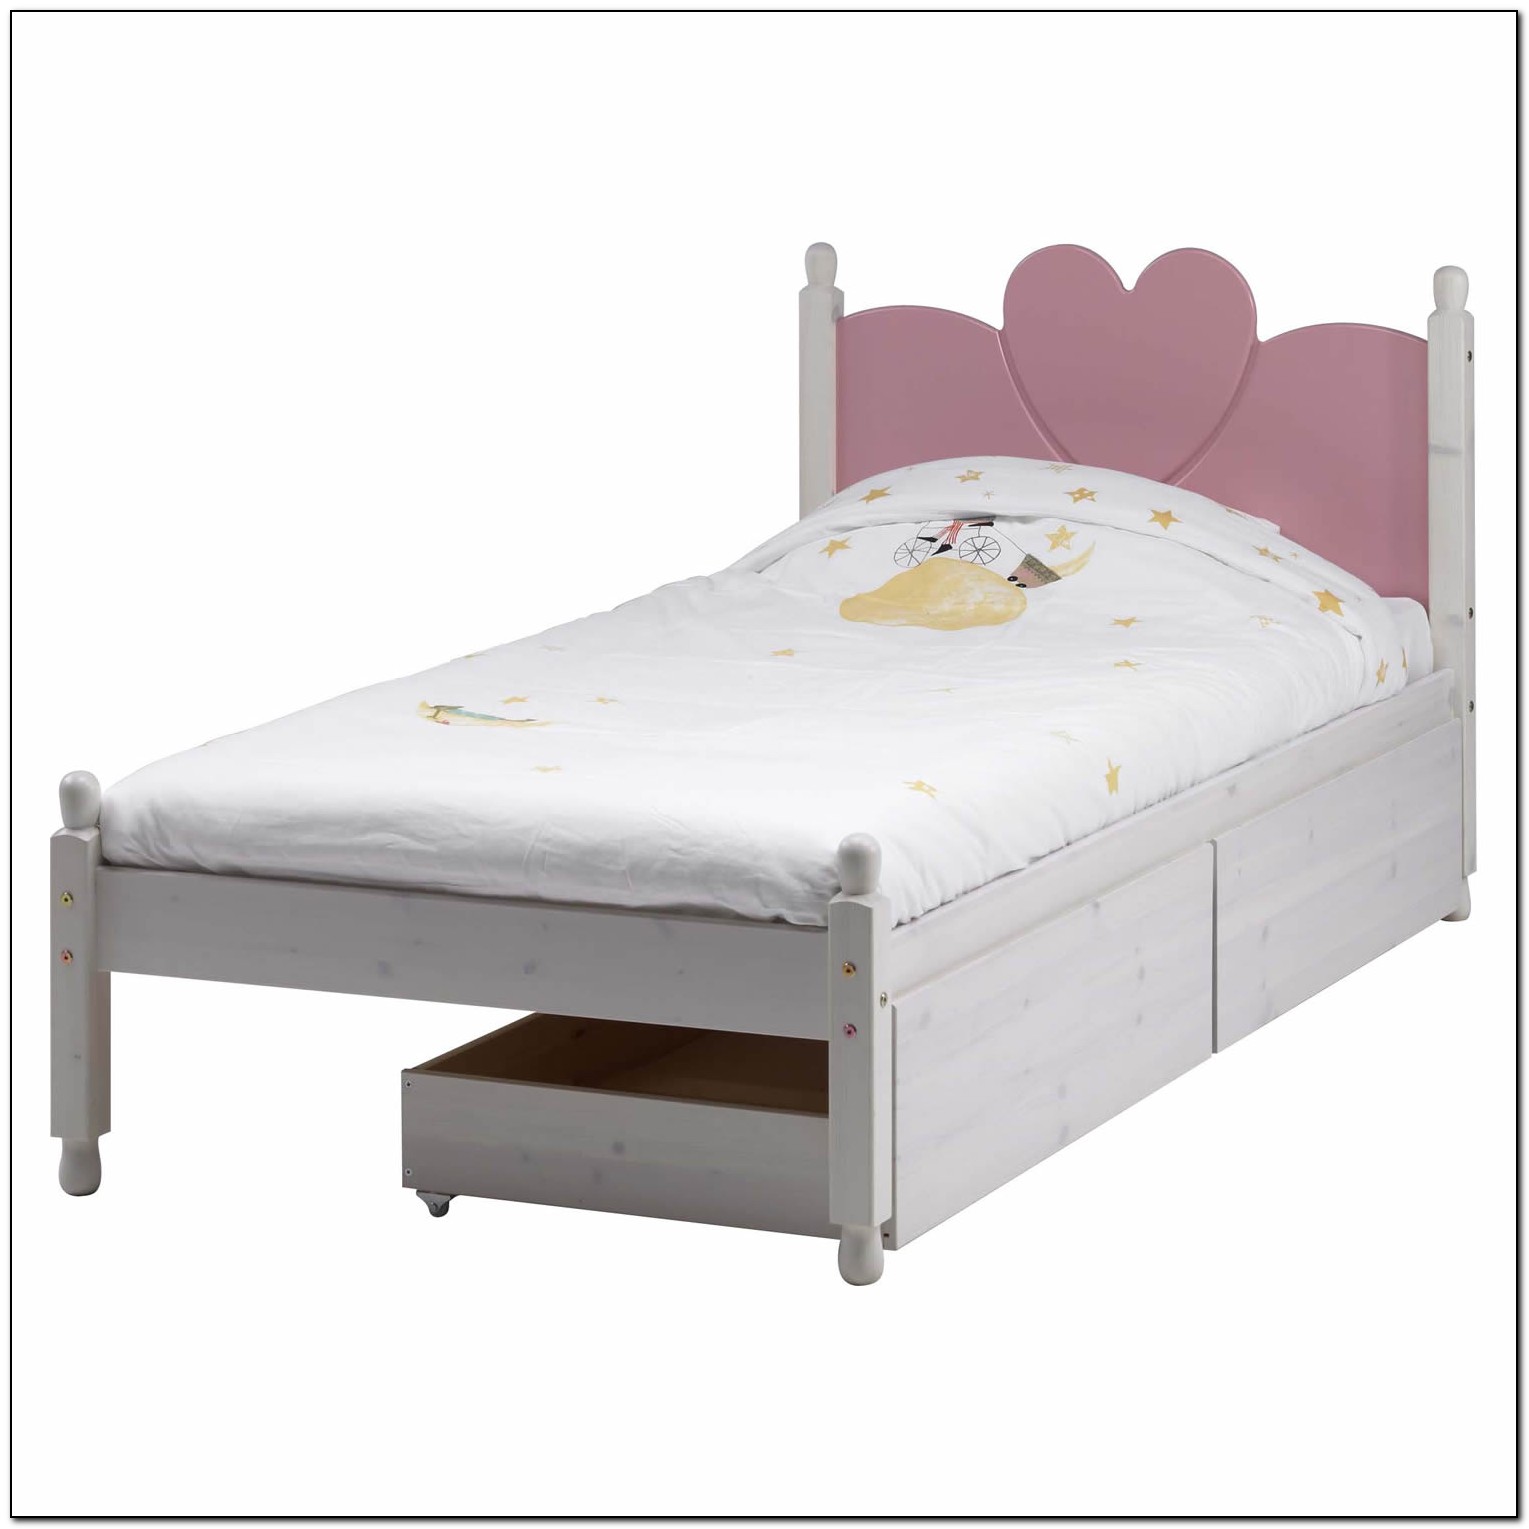 Beds With Drawers Uk